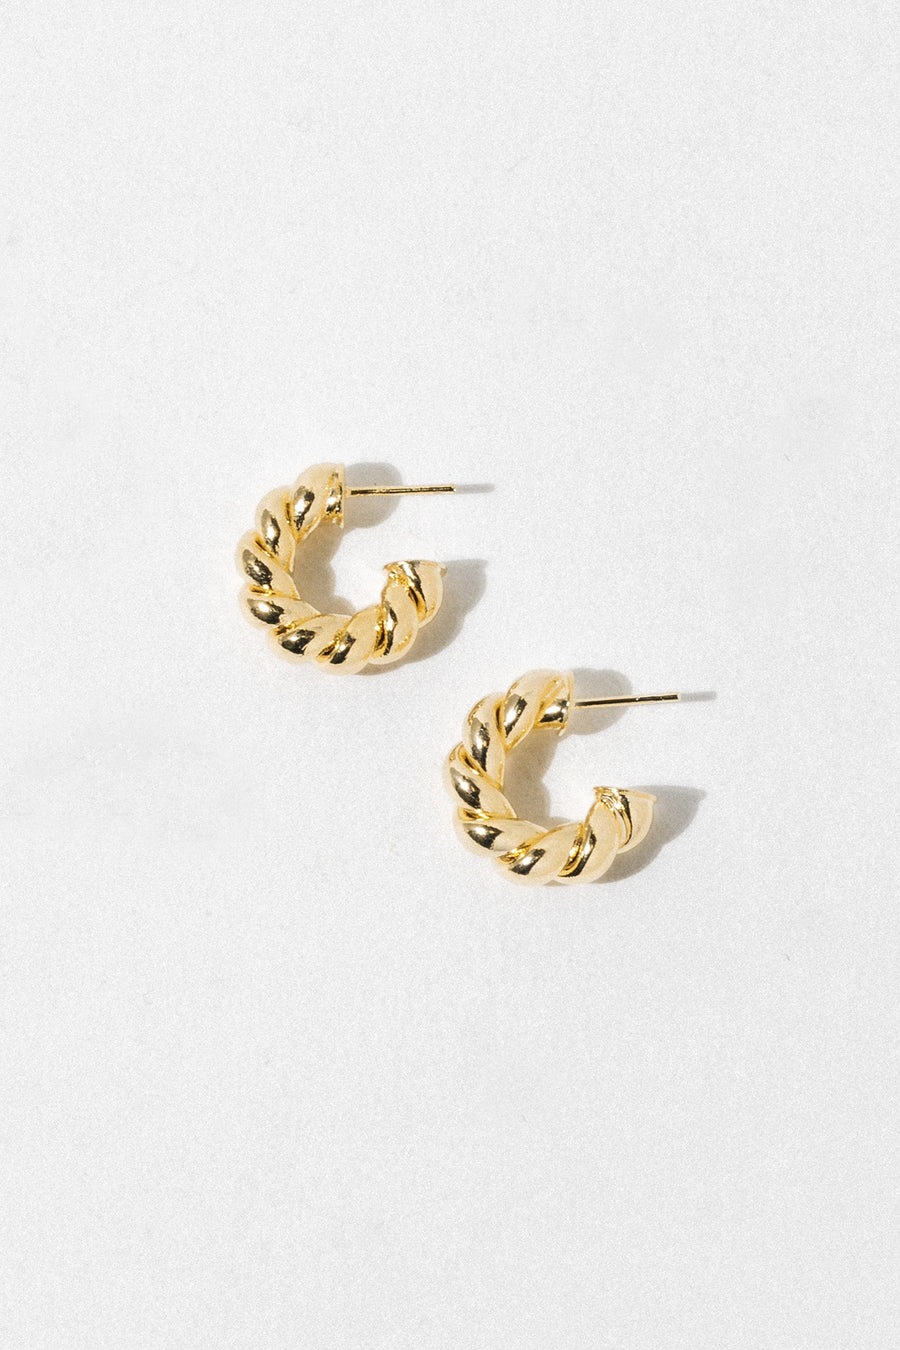 Dona Italia Jewelry Gold / Small Twisted Sister Hoops